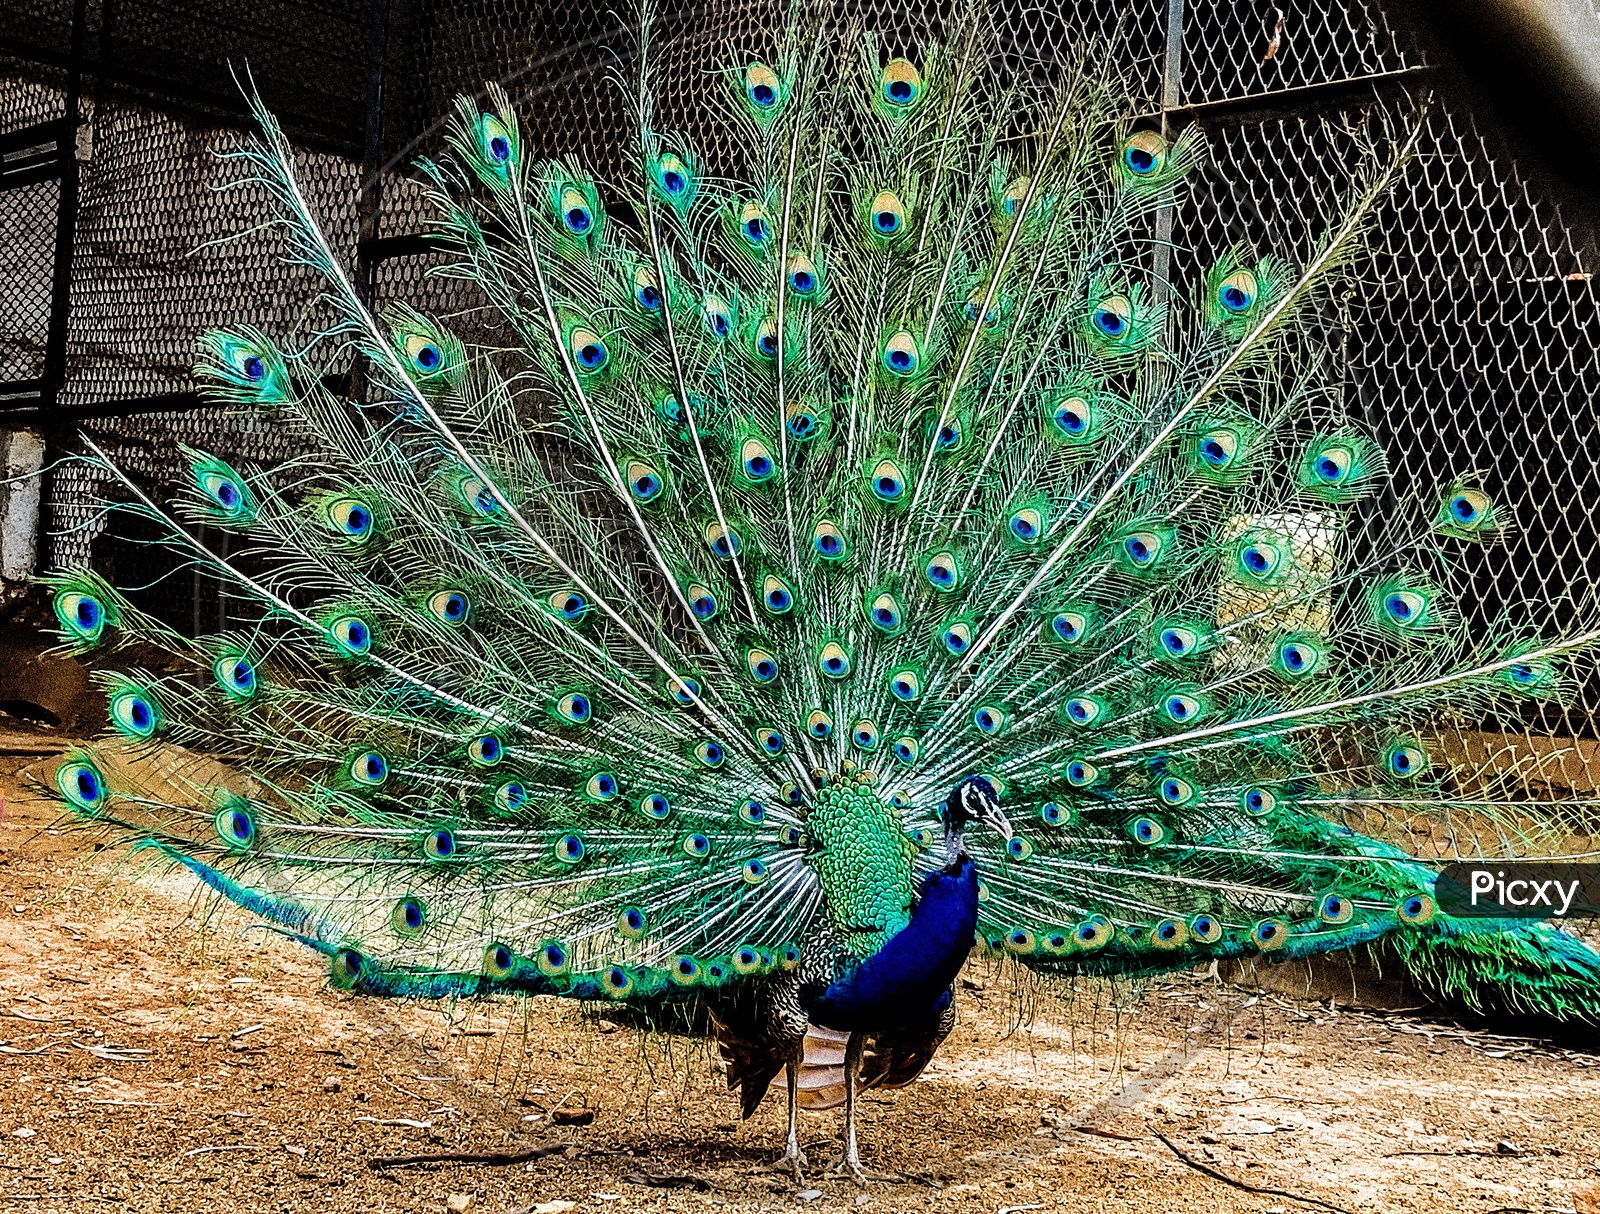 Peacock Opens his Crown Or Feathers